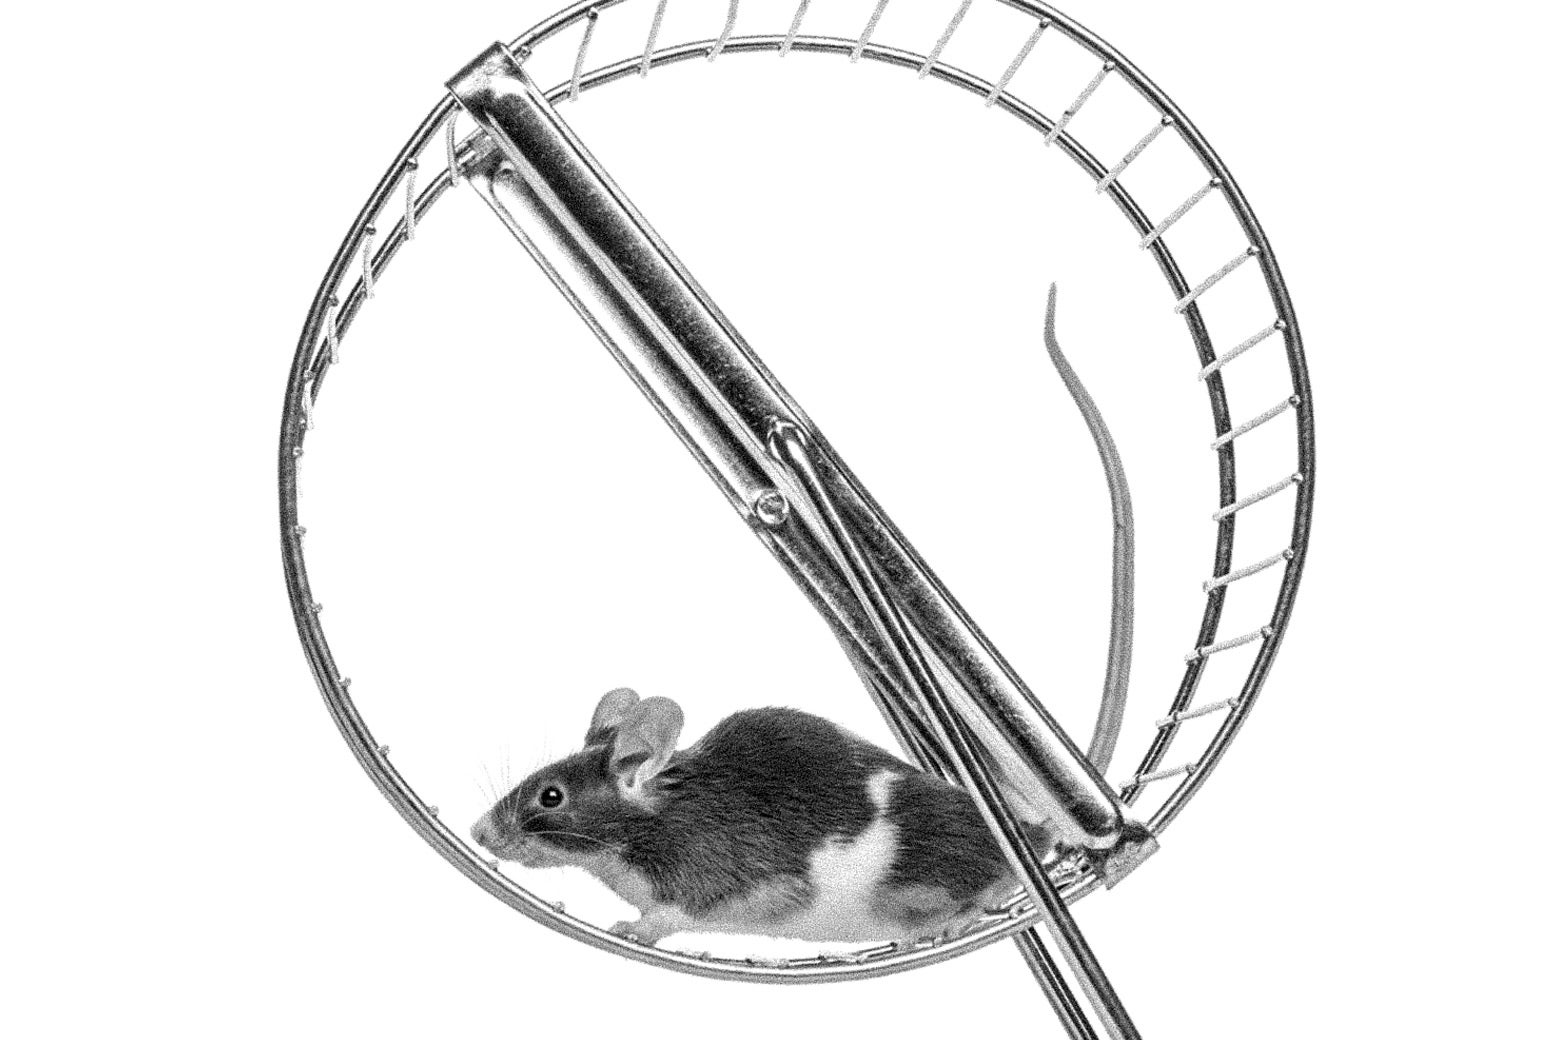 A mouse on a hamster wheel.